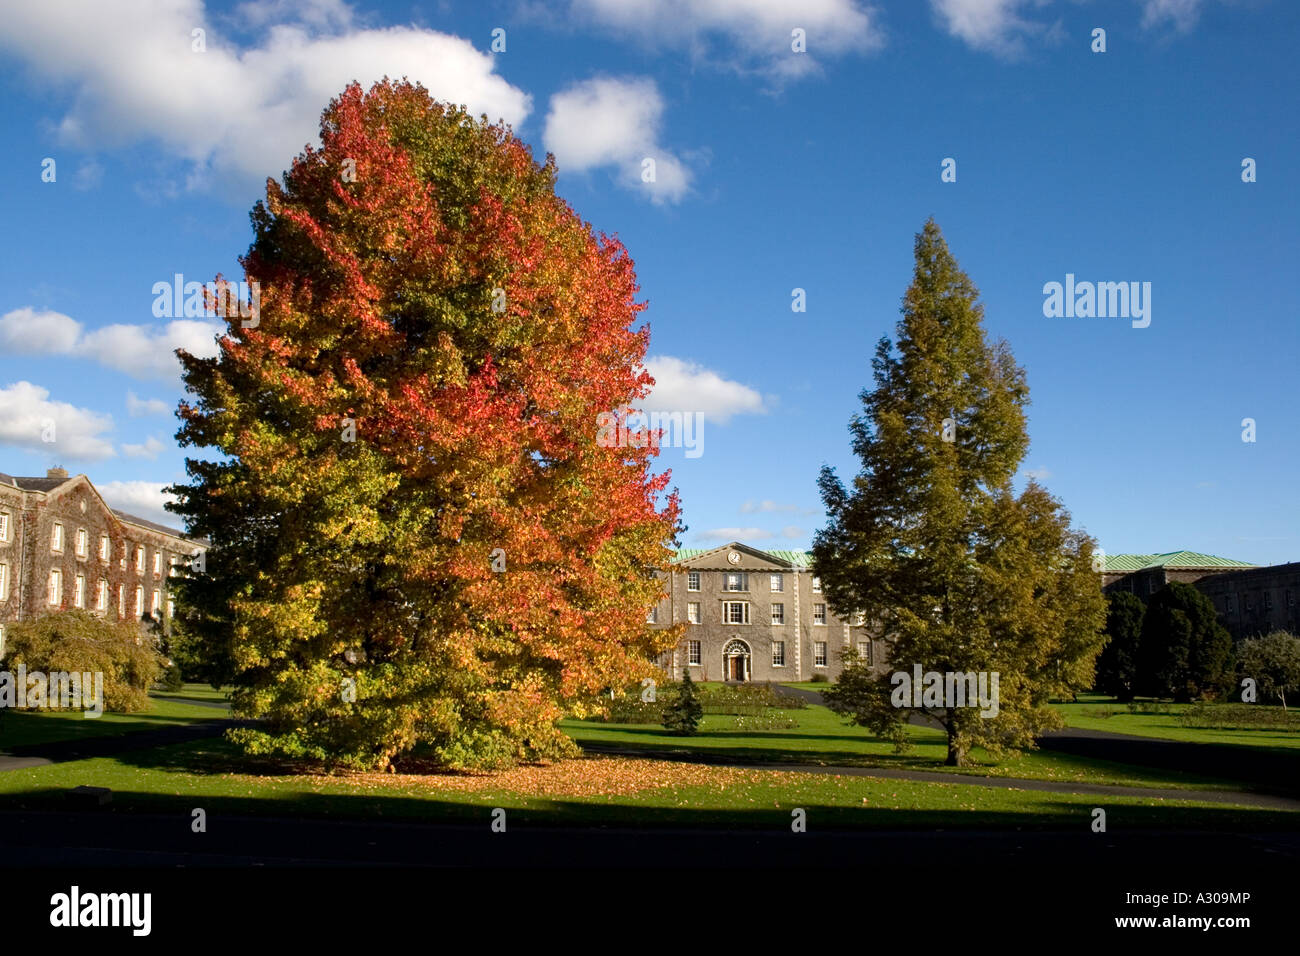 Exterior of maynooth college seen through trees Stock Photo